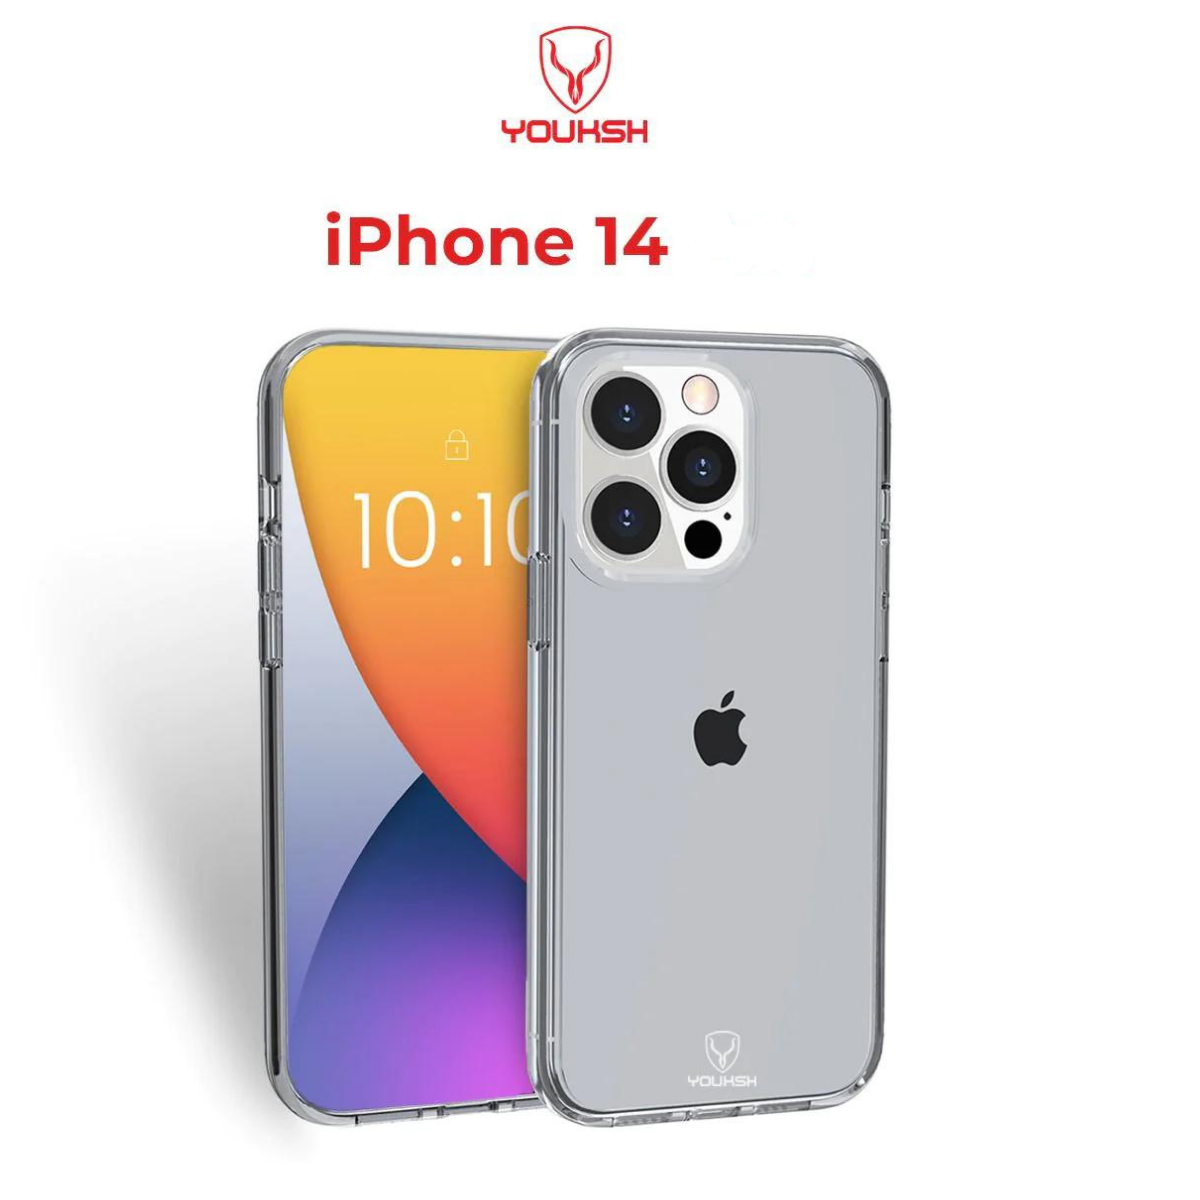 YOUKSH Apple iPhone 14 Transparent Case | Soft Shock Proof Jelly Cover